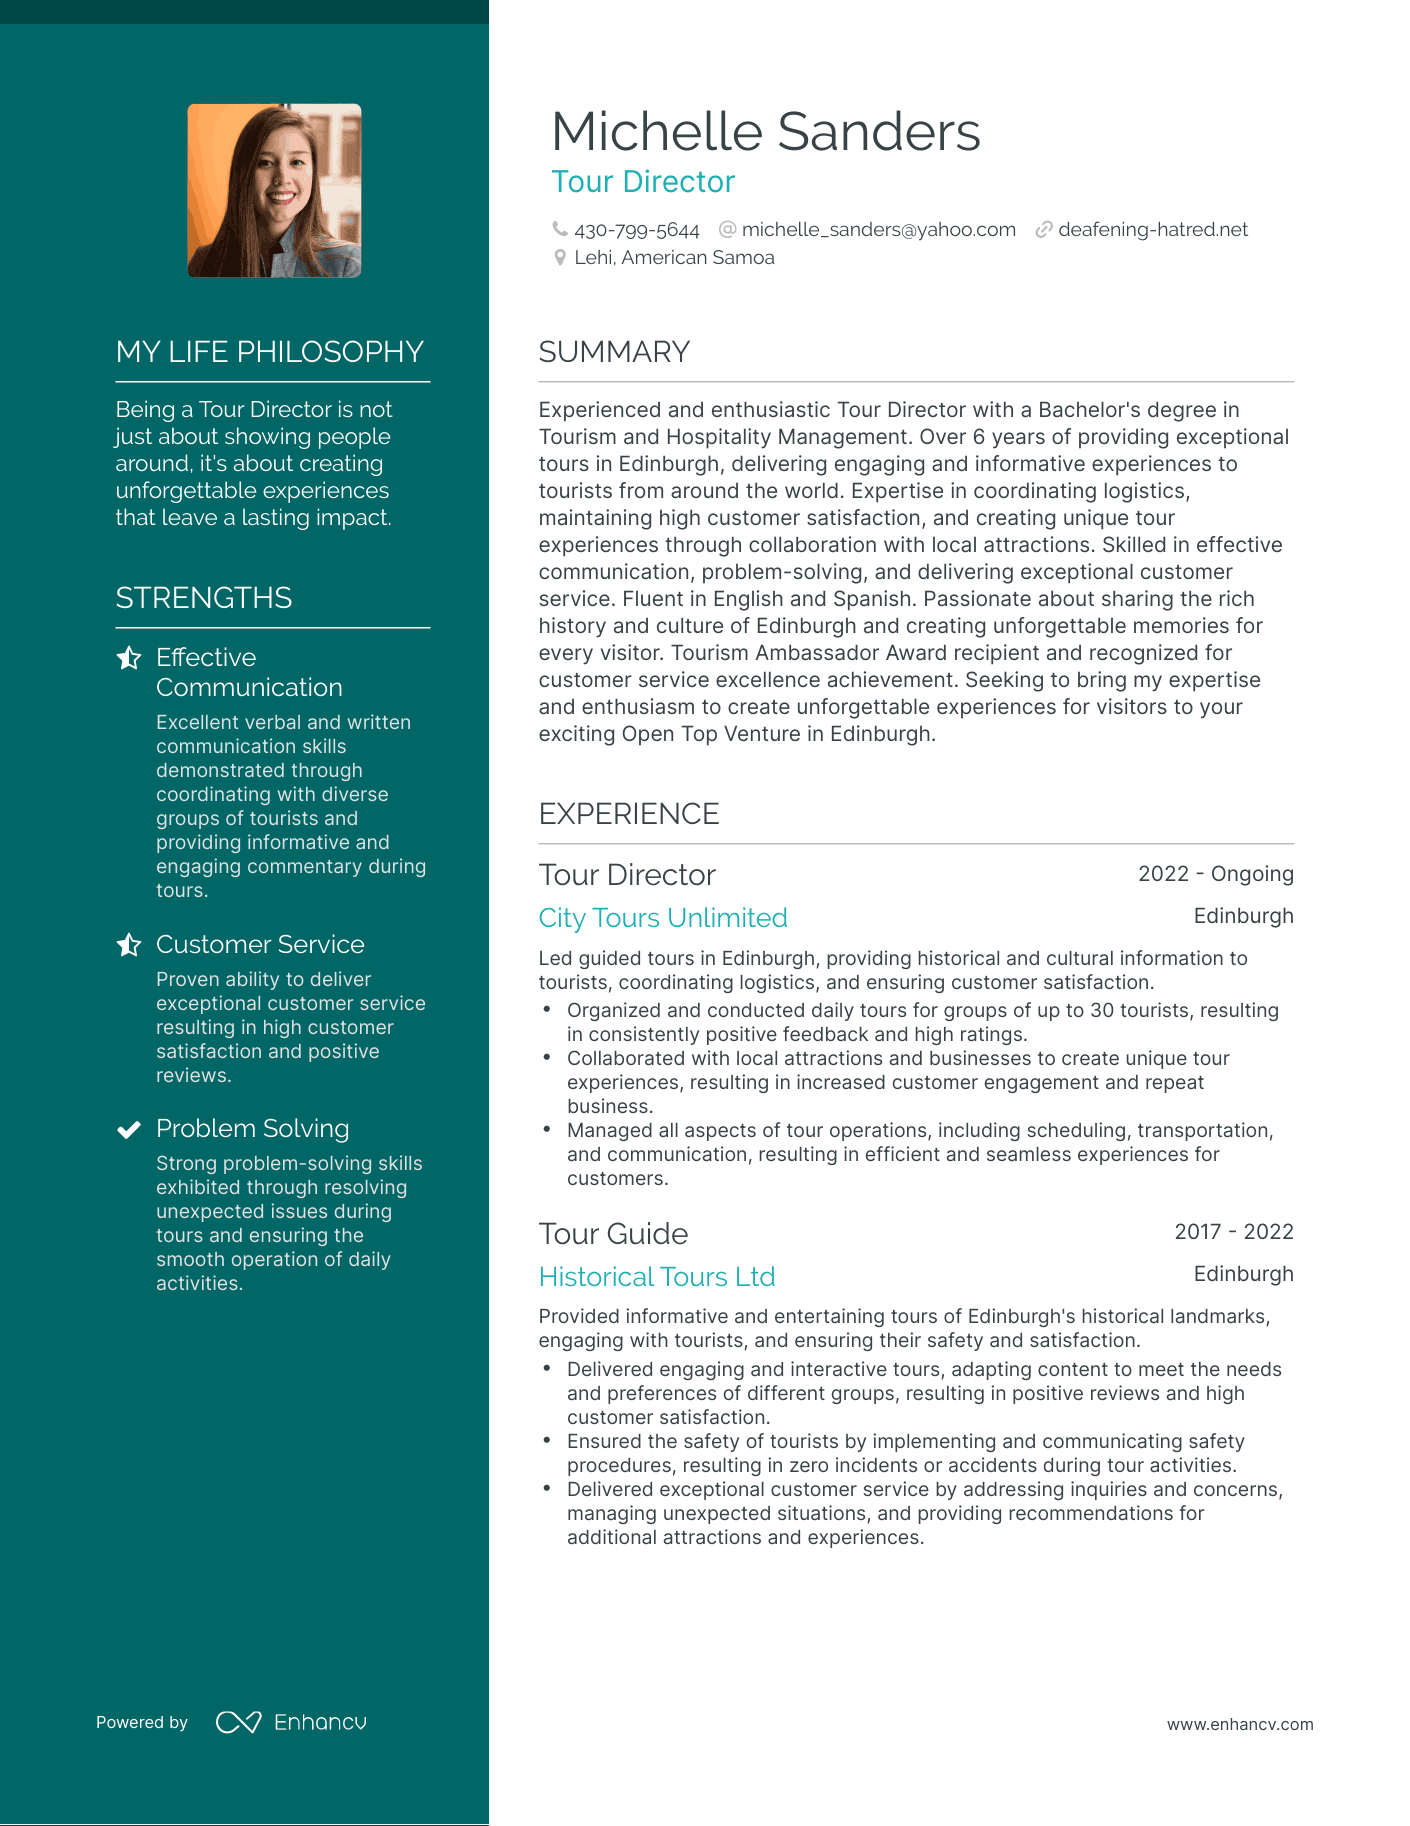 Tour Director resume example